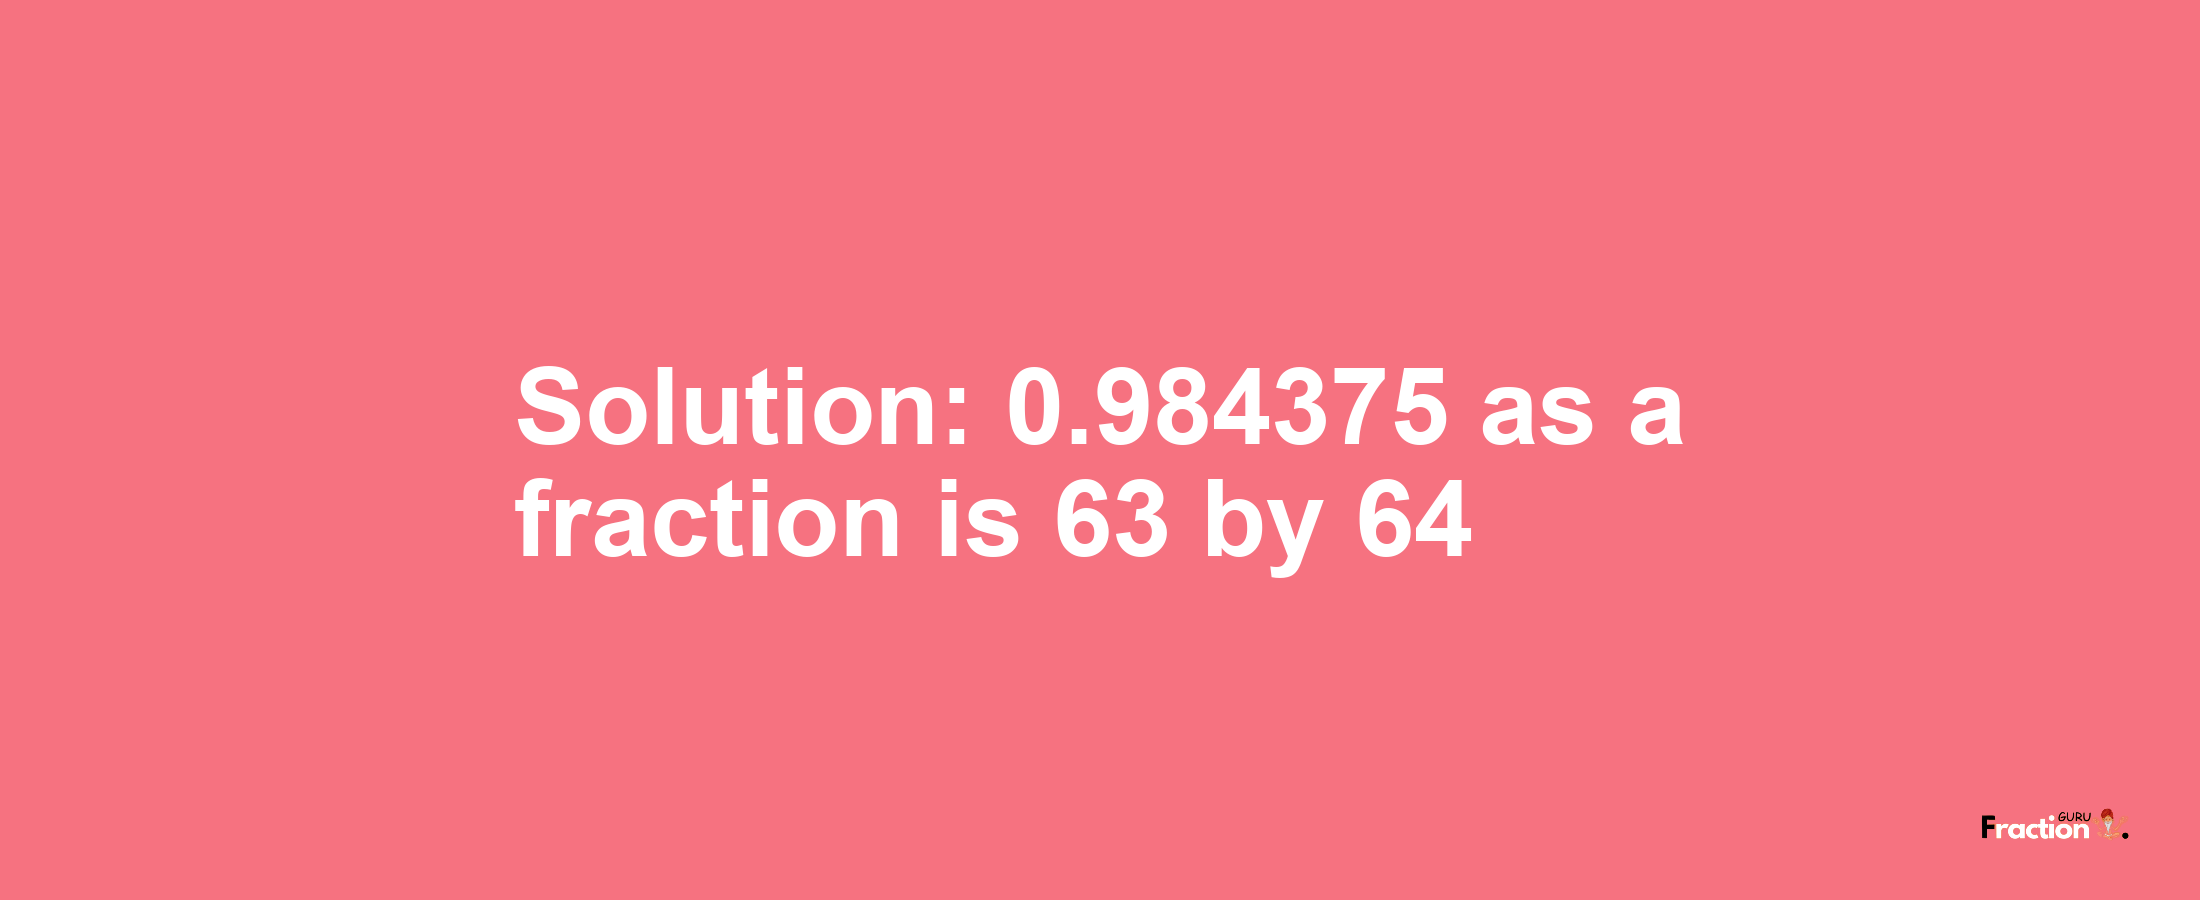 Solution:0.984375 as a fraction is 63/64